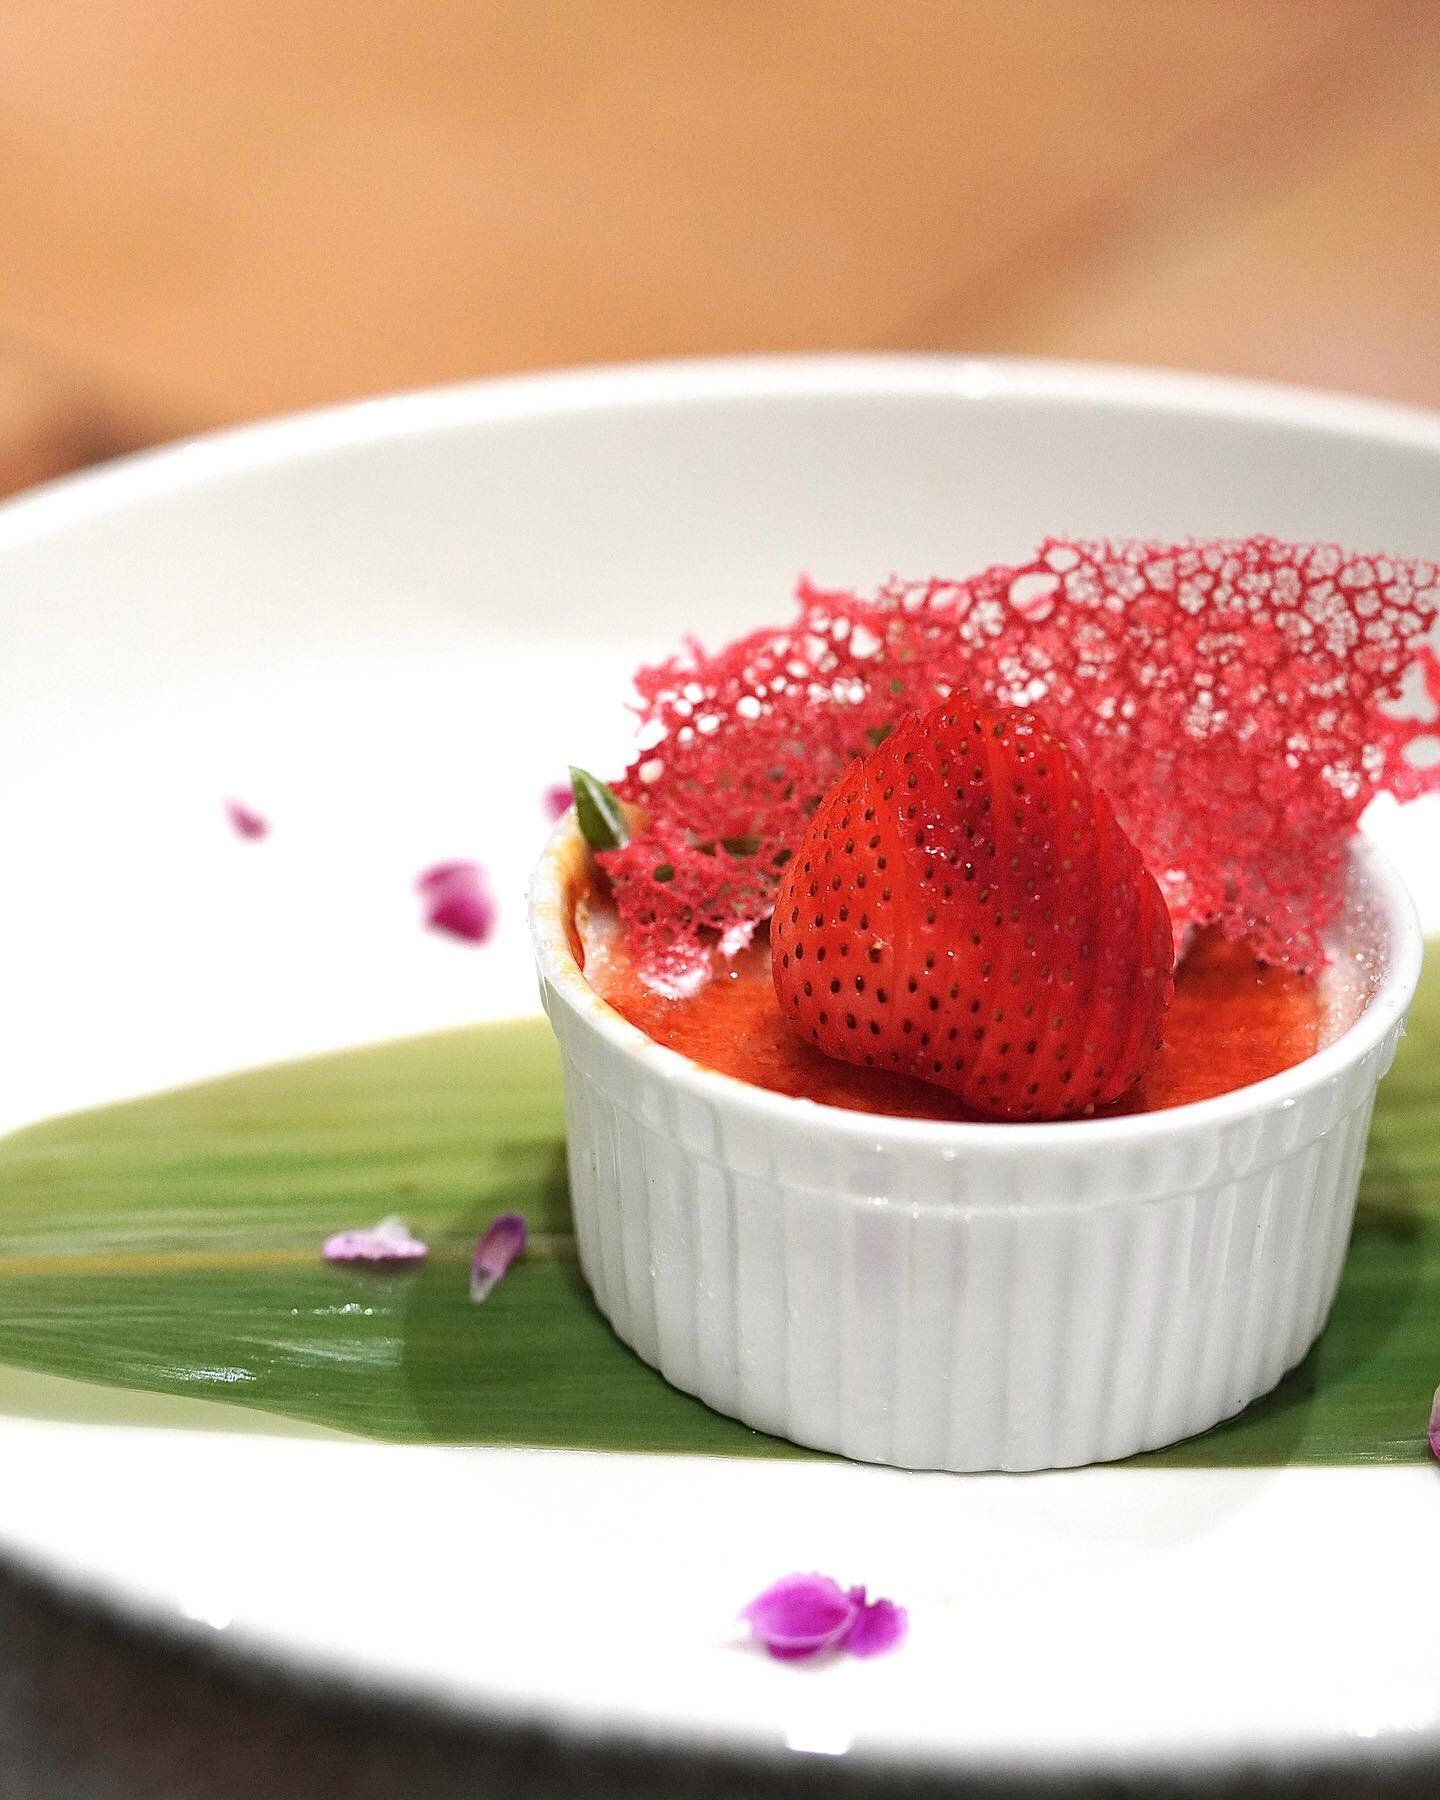 Our special dessert for Valentine&rsquo;s Day: Strawberry Br&ucirc;l&eacute;e - where succulent strawberries meet a delicate caramelized crust. 🍓
We only have last few seats available. Secure your spot now! 💕

📞 0467 888 840
💻 www.takashiya.com.a